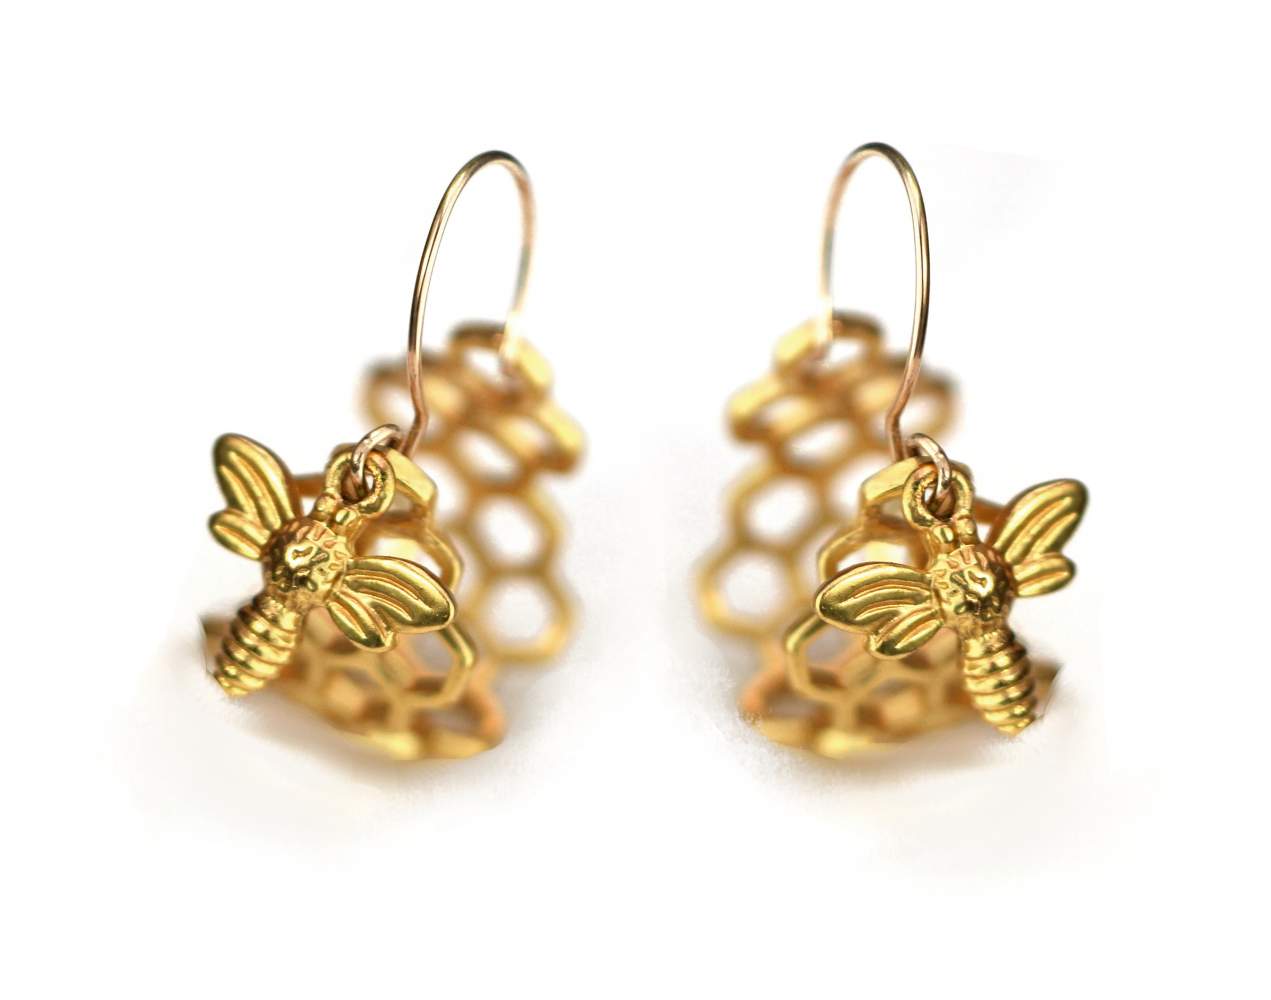 Honeycomb Earrings with tiny bees